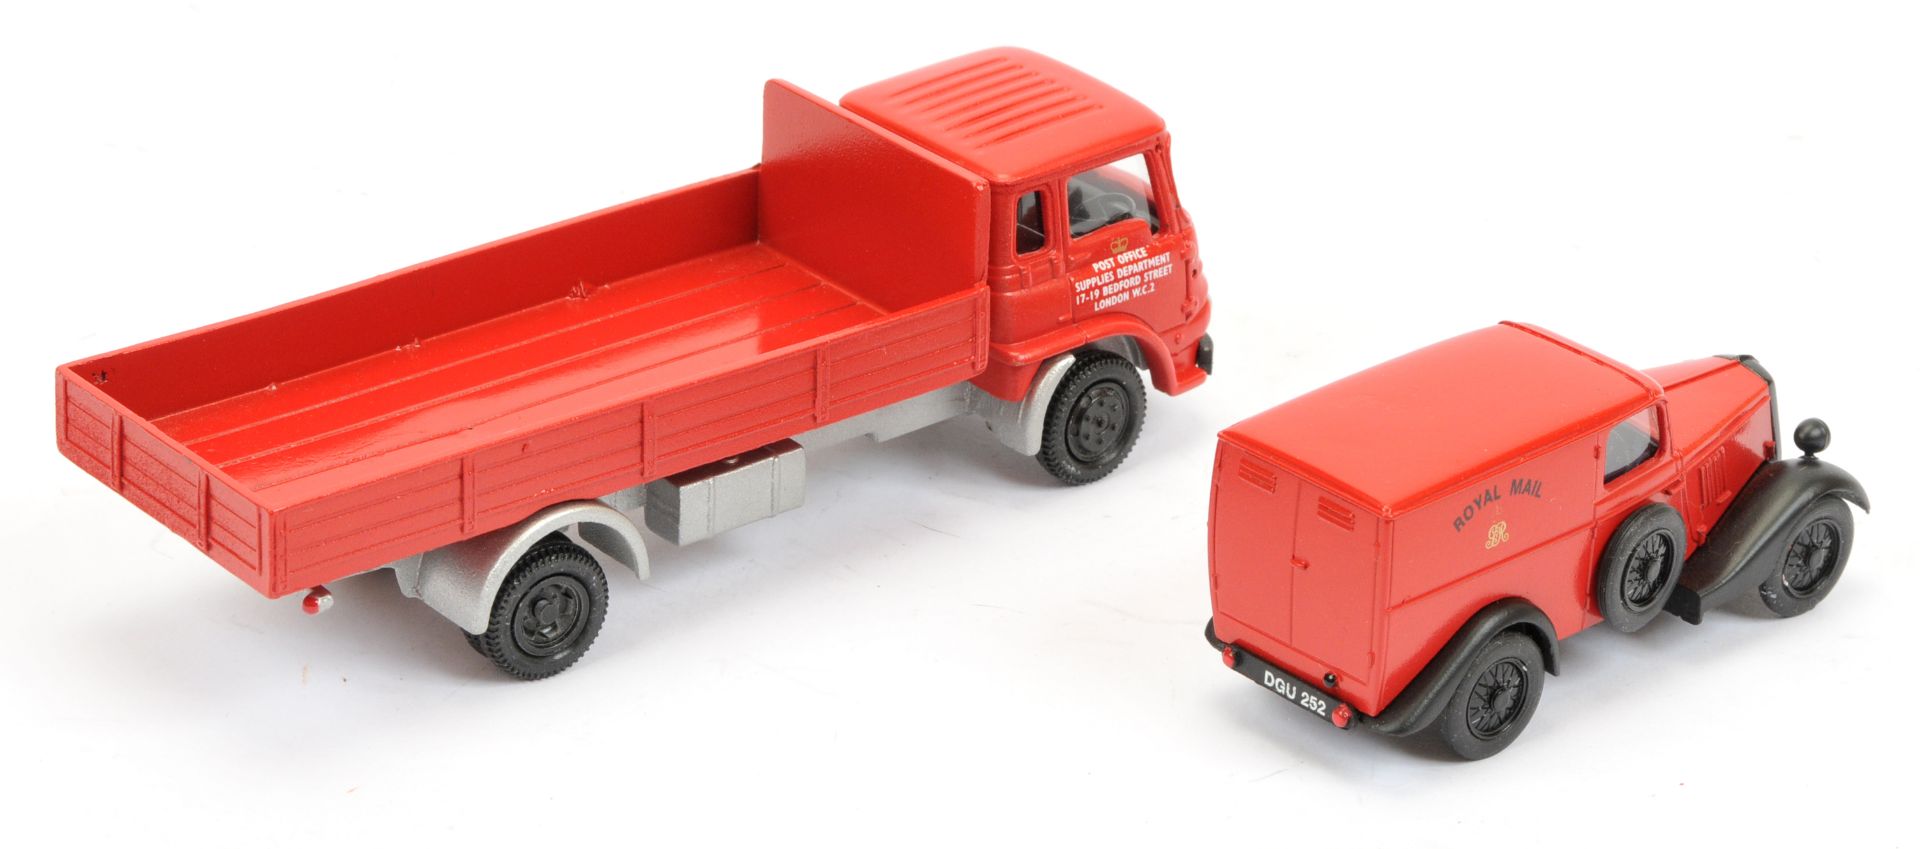 Promod Resin/White Metal A Pair (1) "Royal Mail" Ford Type y - Red and (2) " Post Office Supplies... - Image 2 of 2